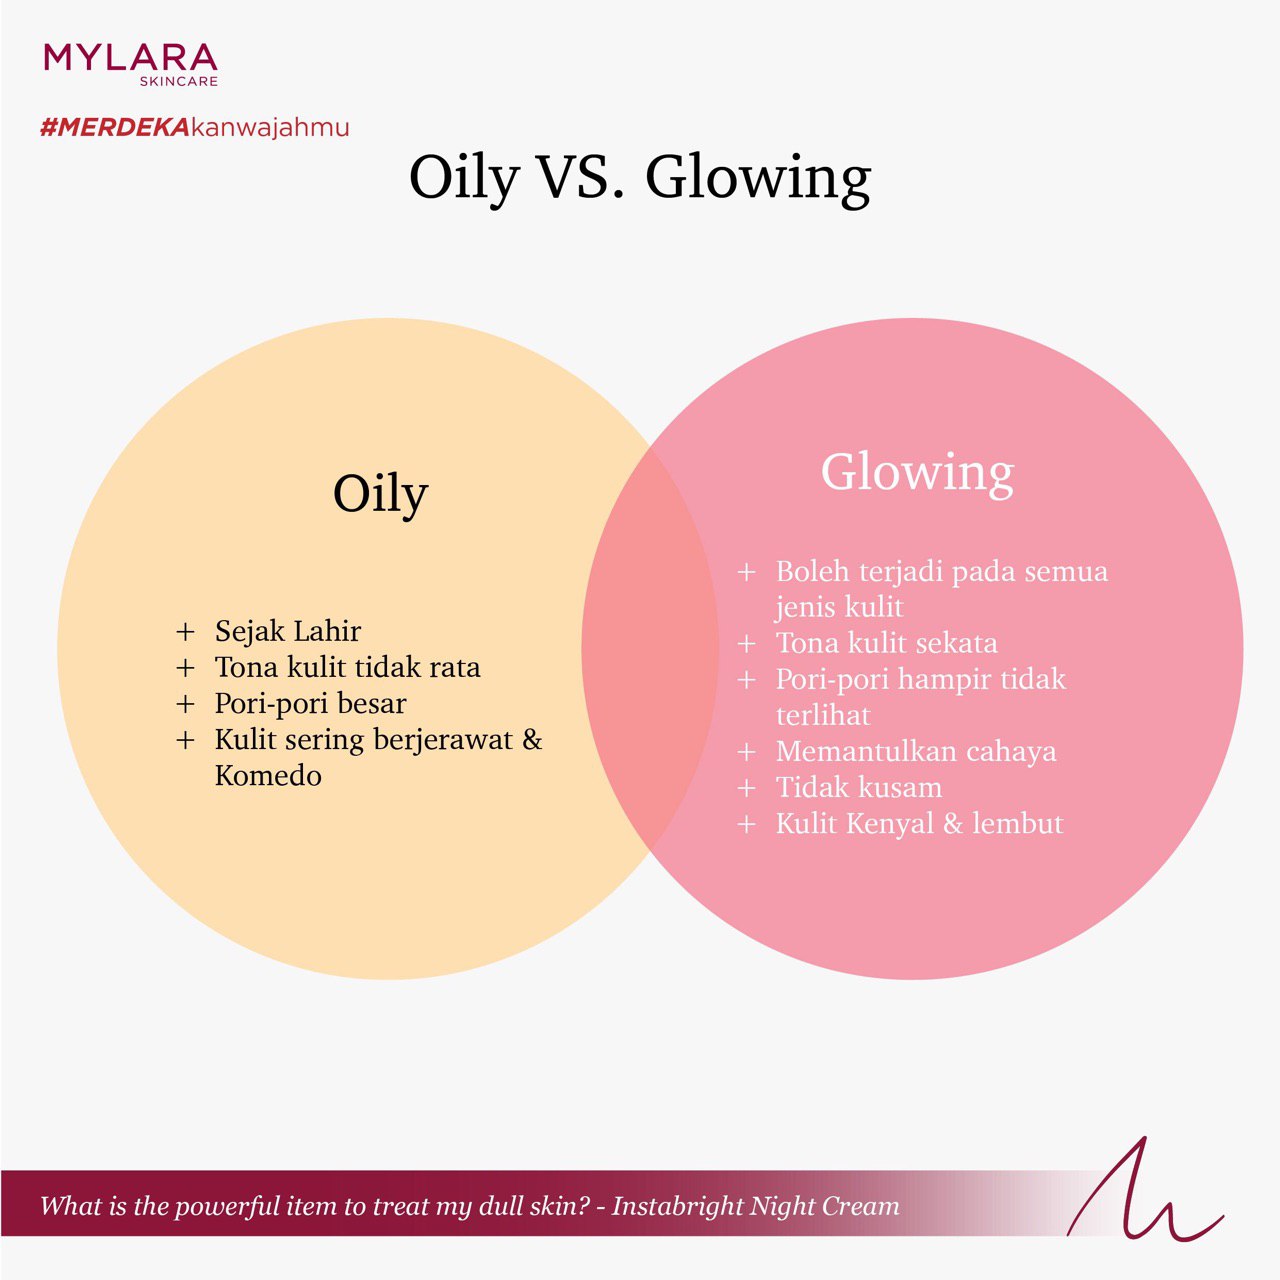 olly flawless complexion vs glowing skin